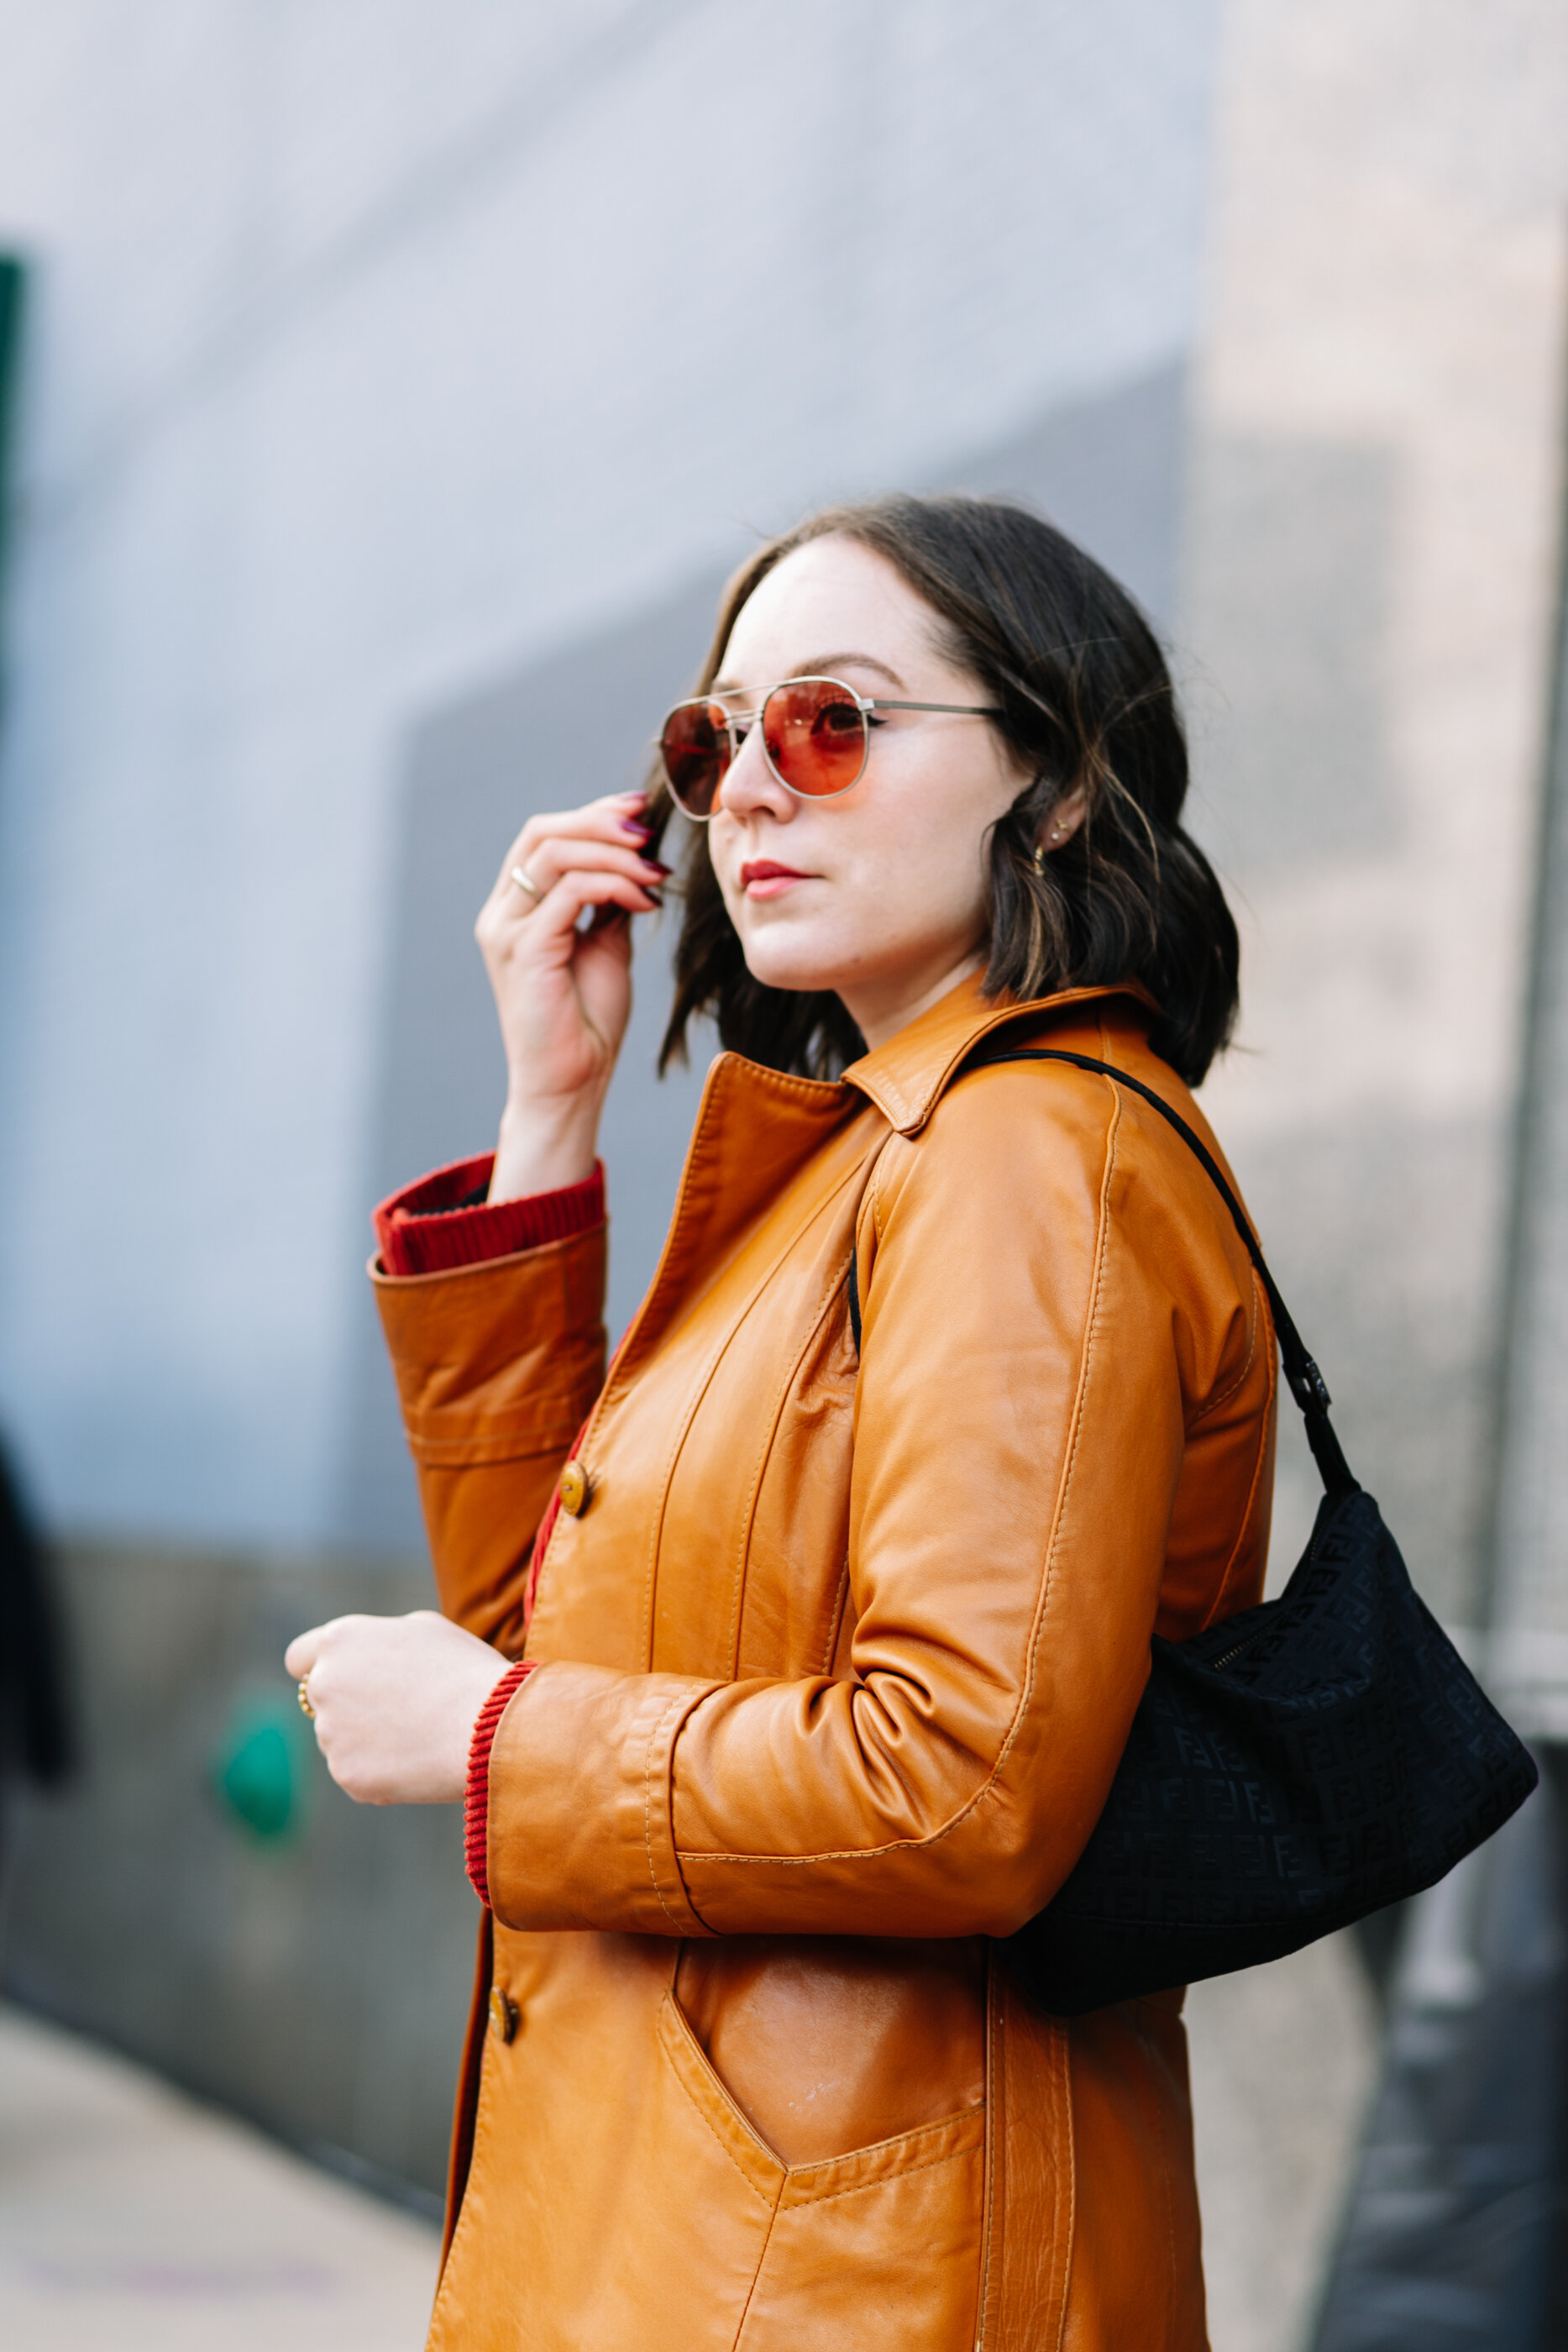 10 Thrift Fashion Bloggers To Follow in 2021